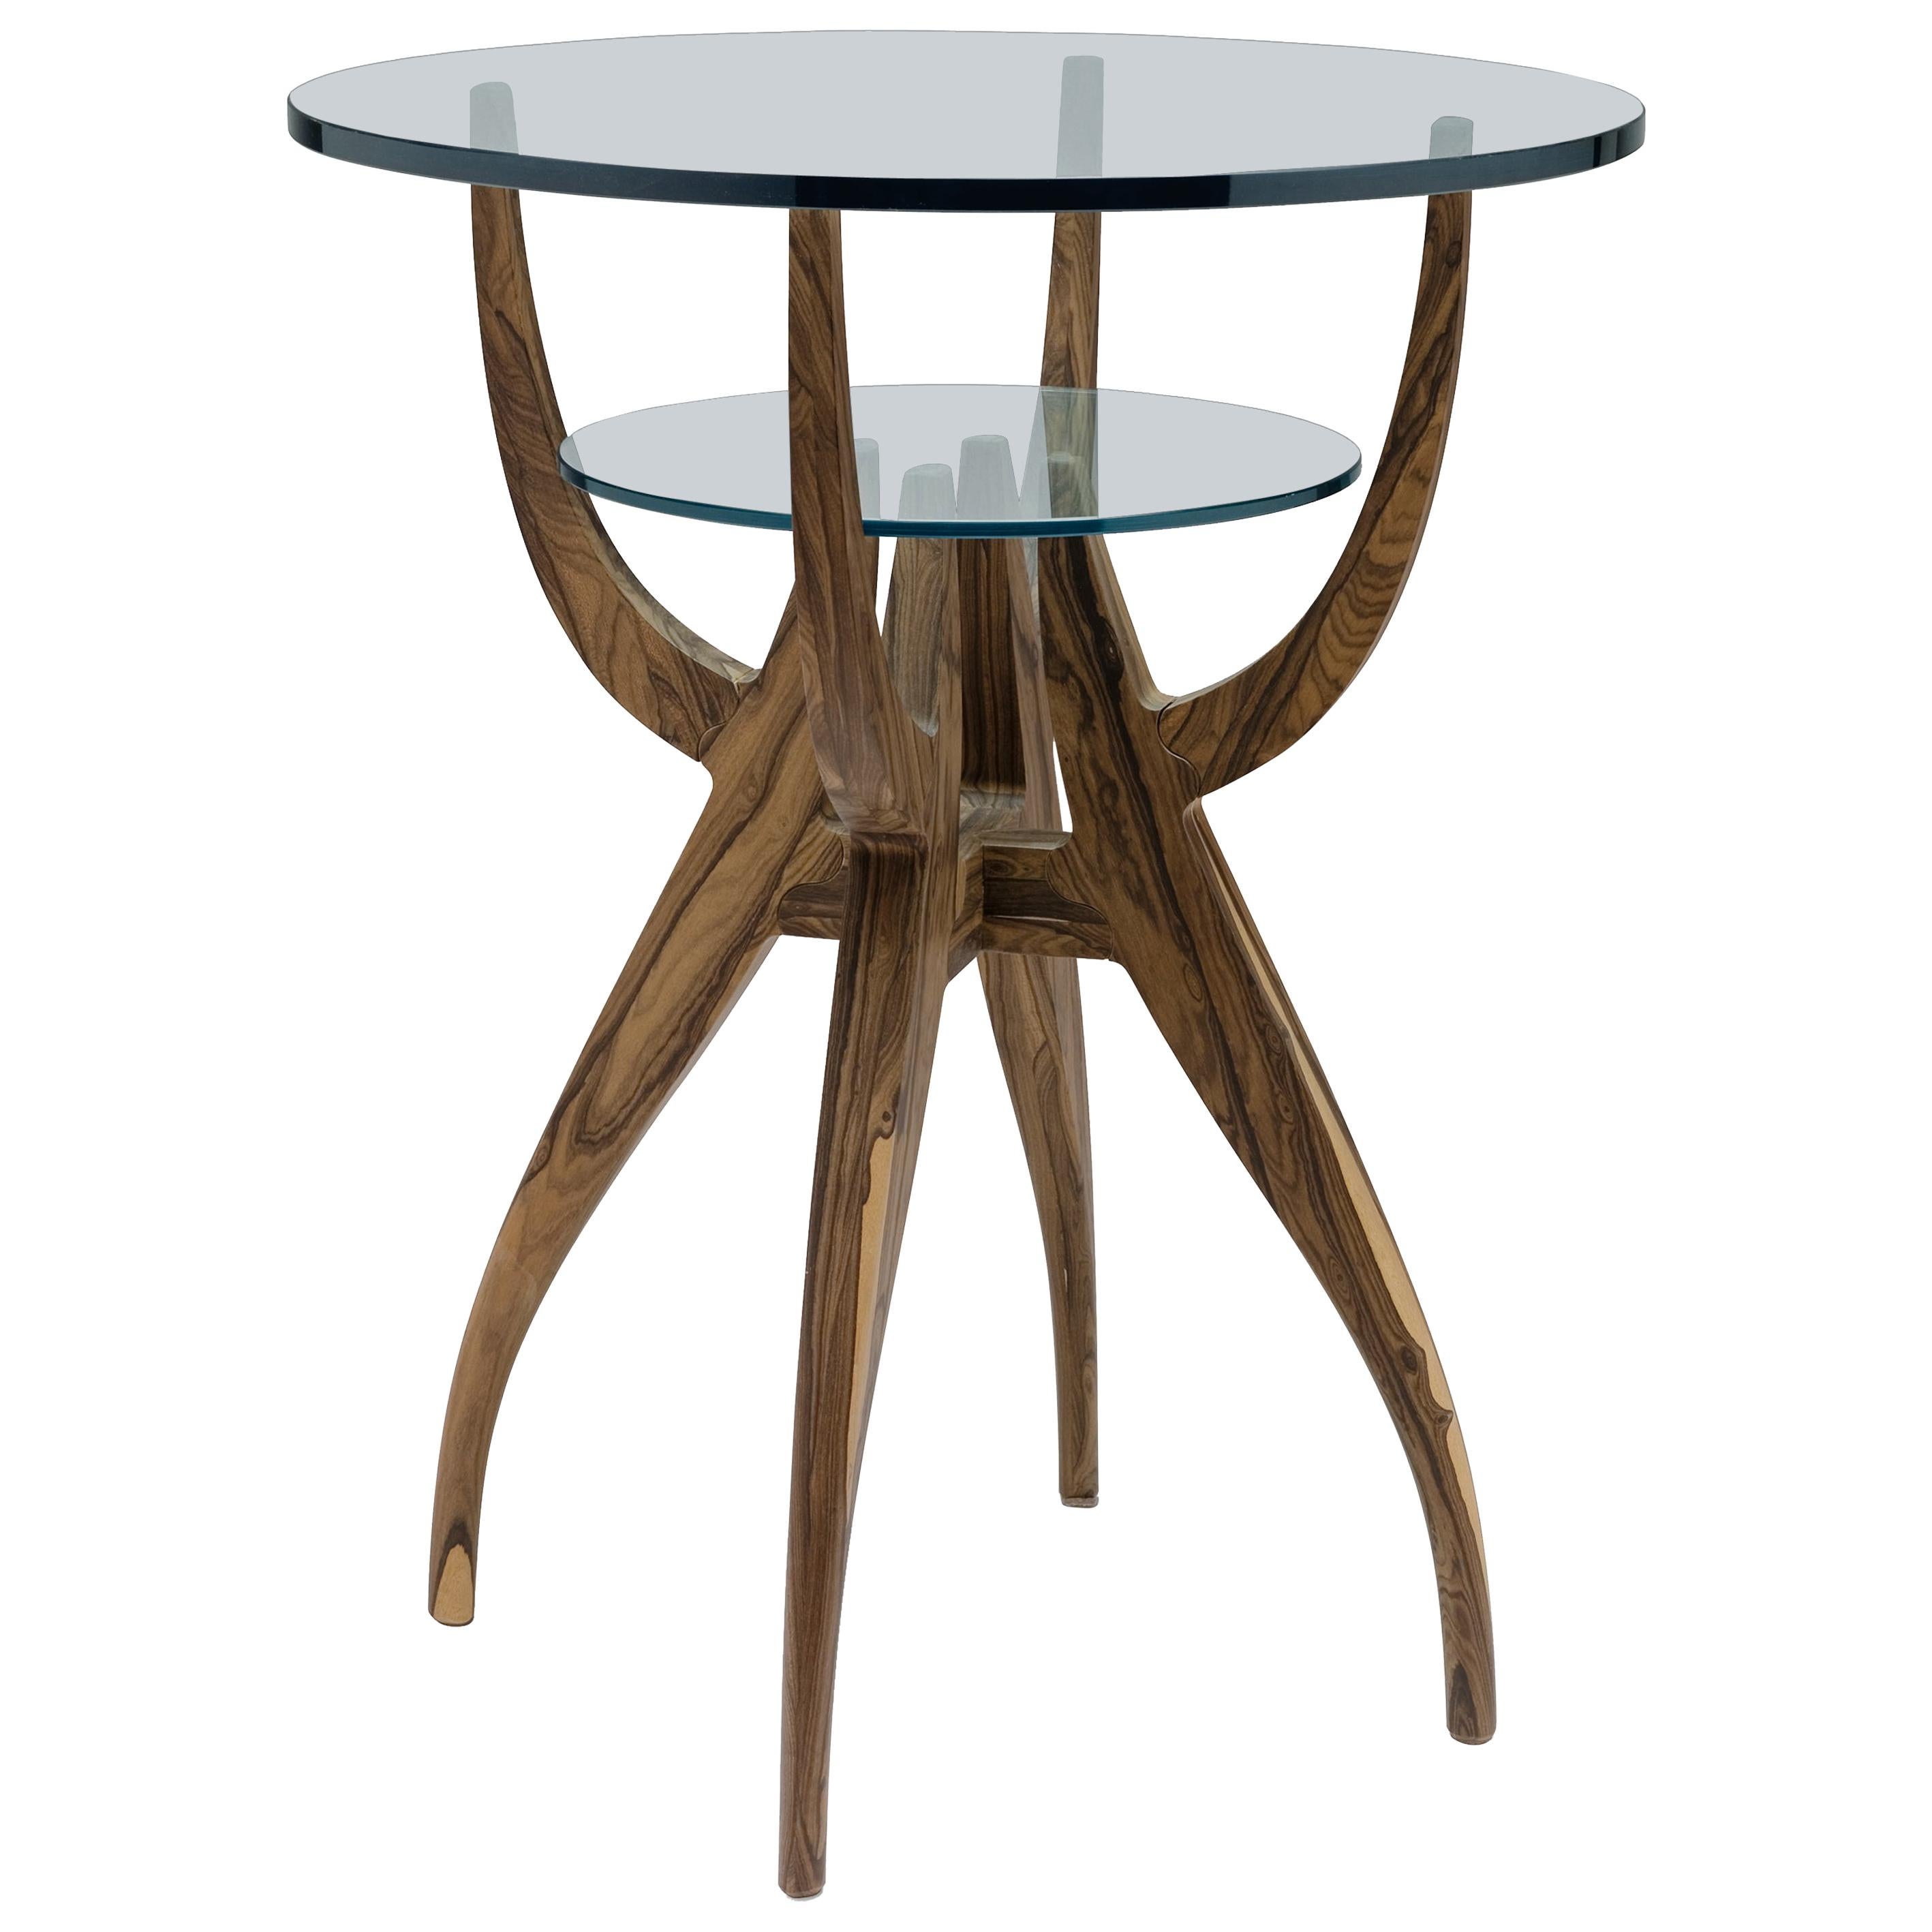 STAG/G Bar table in Solid Walnut and Glass Tops designed by Nigel Coats For Sale